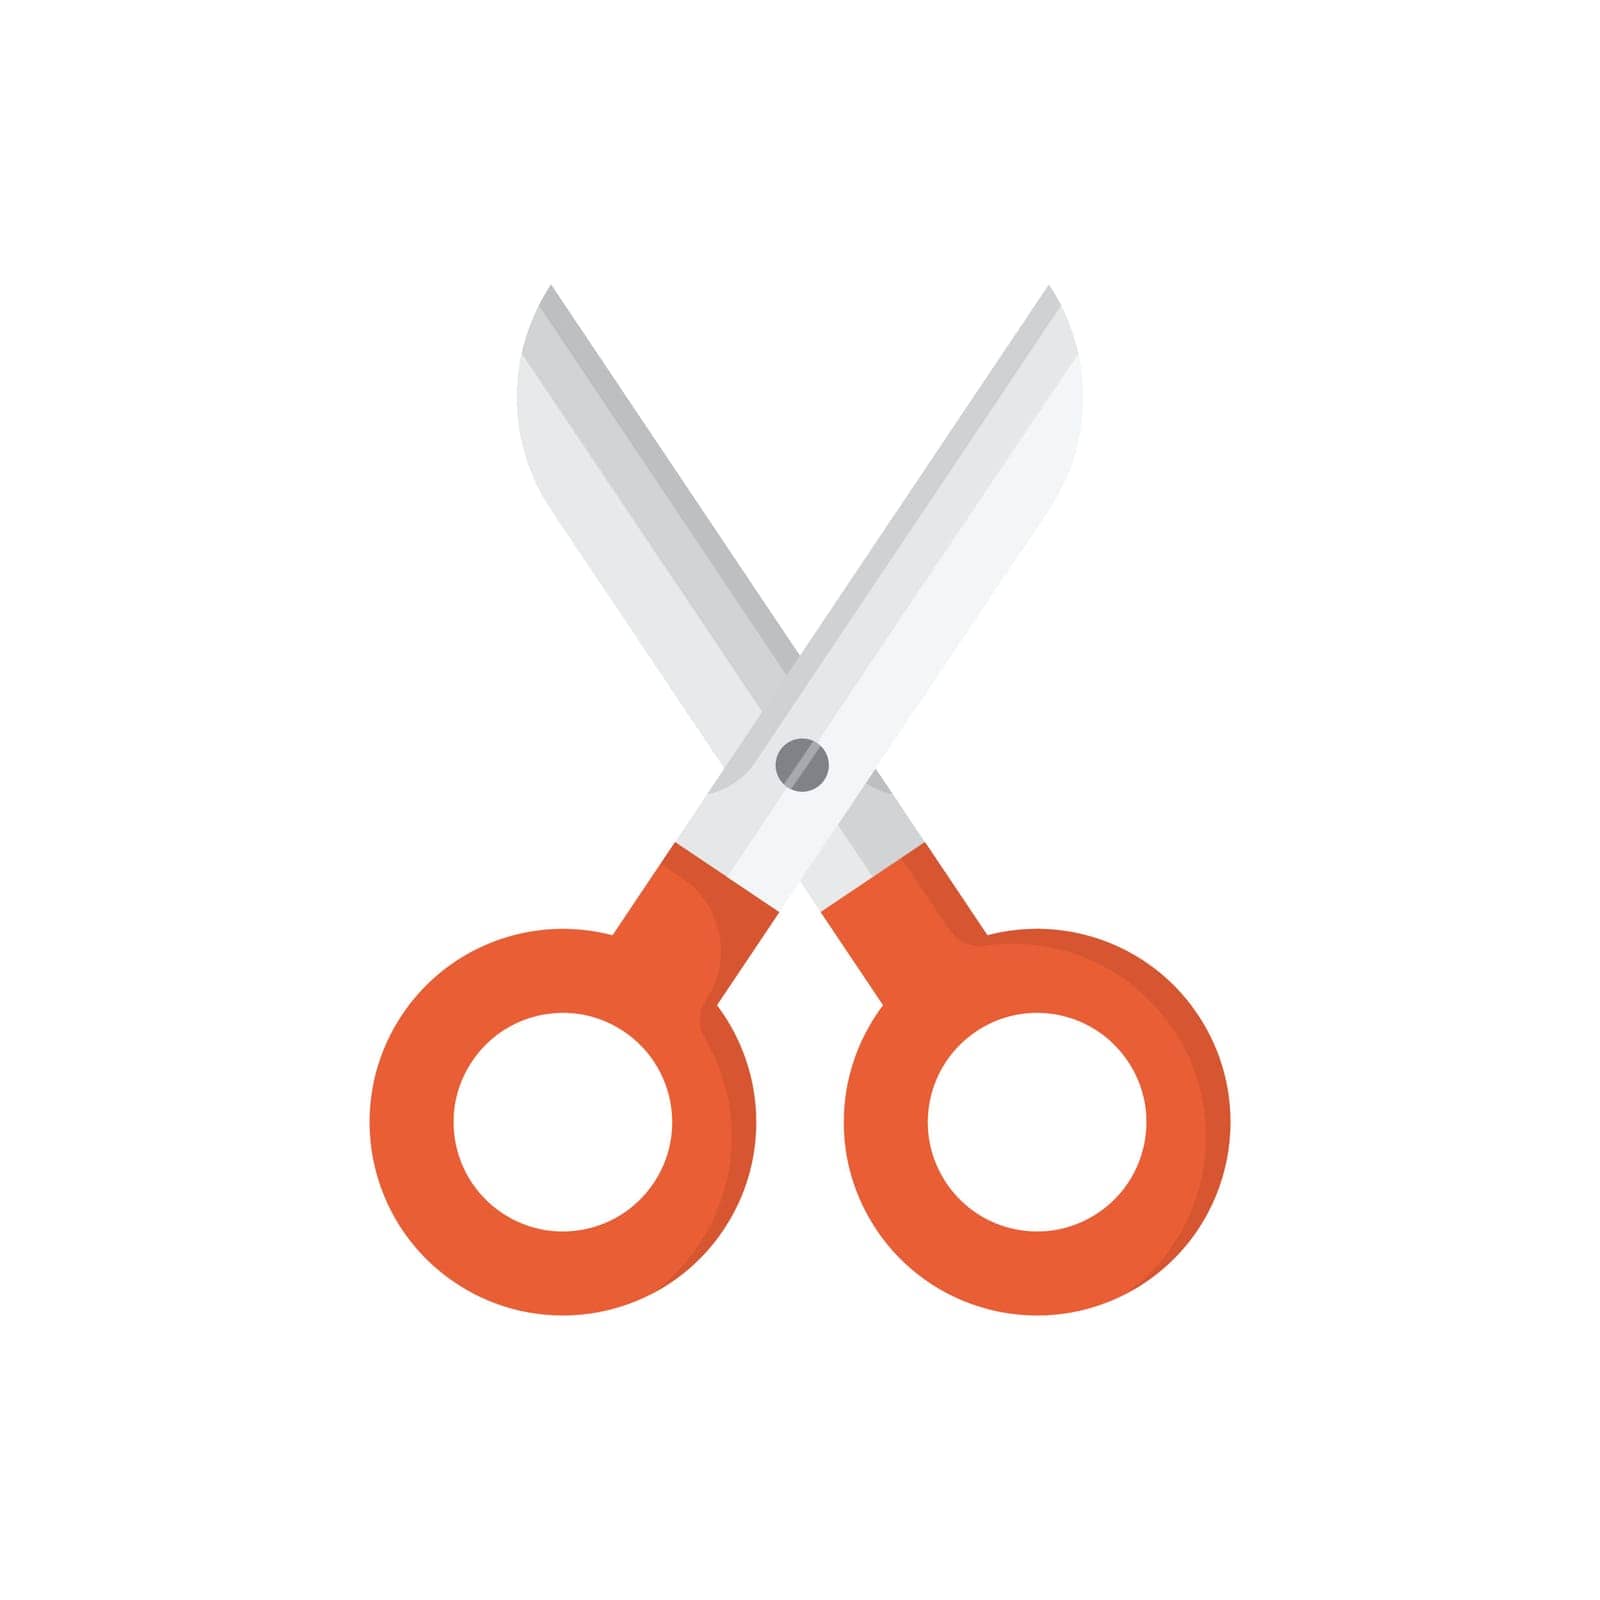 Scissor icon in flat style. Cutting hair equipment vector illustration on isolated background. Hairdressing sign business concept.